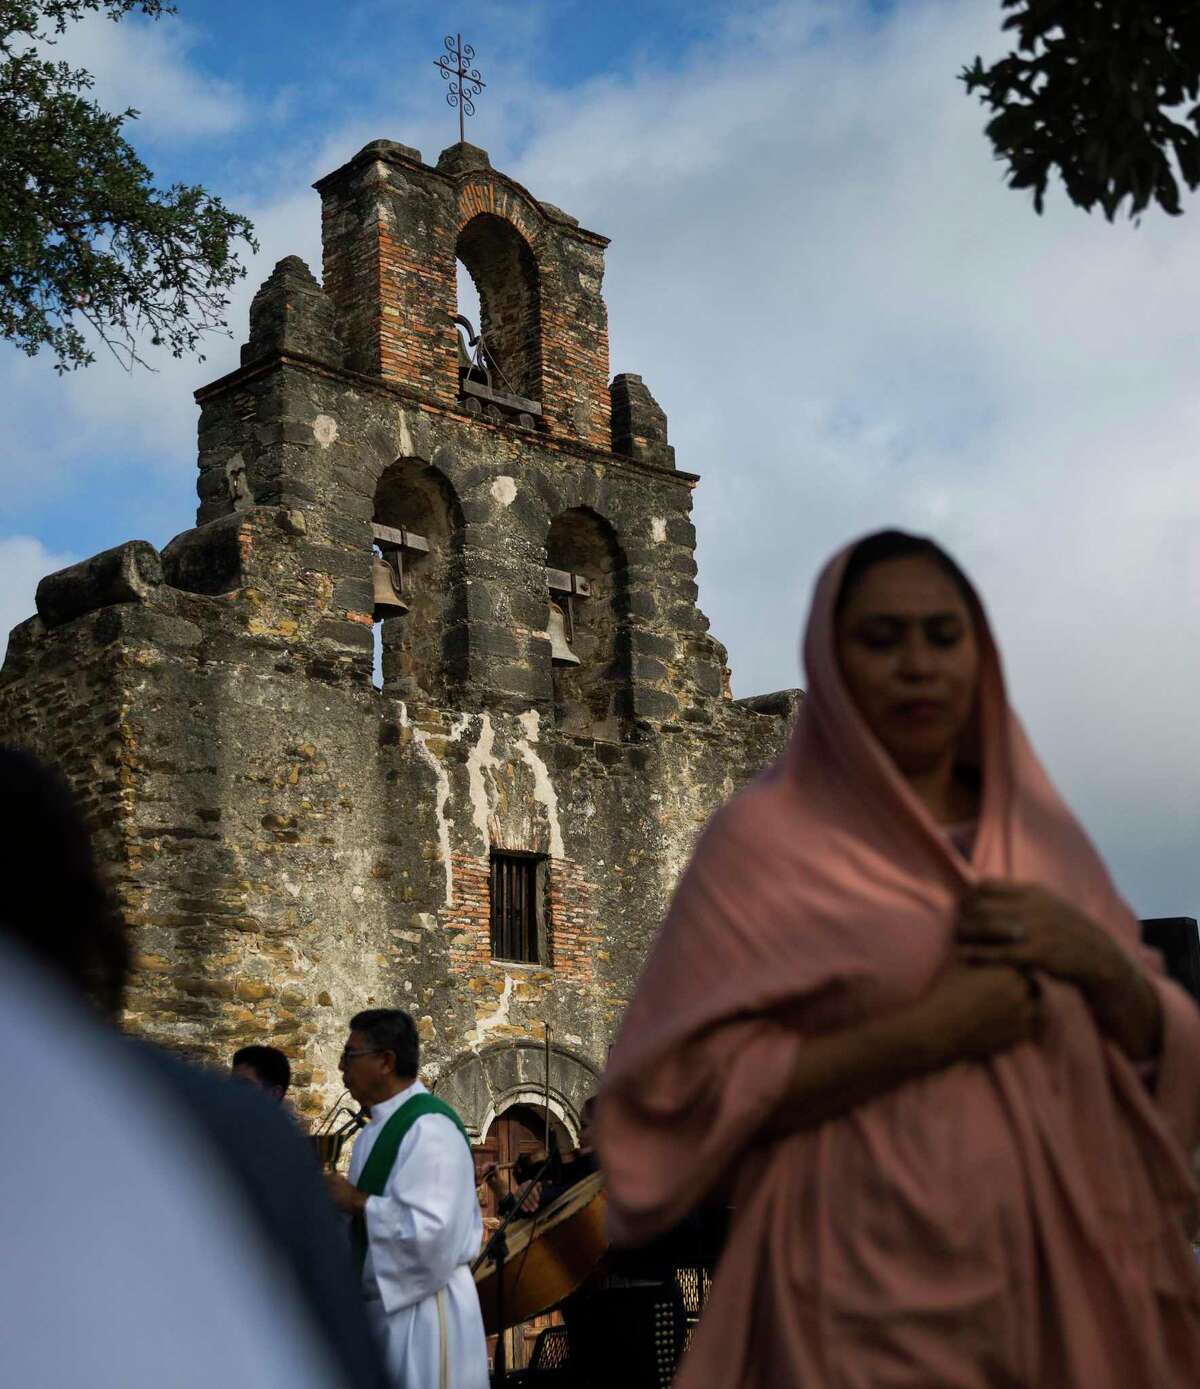 Deacon Alberto Rodriguez, left, gives mass attendees sacrament during the "El Camino de San Antonio: Caring for Creation" mariachi mass at Mission Espada in San Antonio on Sunday, Sept. 8, 2019. After the mass Archbishop Gustavo García-Siller, not pictured, led a procession on a 1.5-mile walk to Mission San Juan.